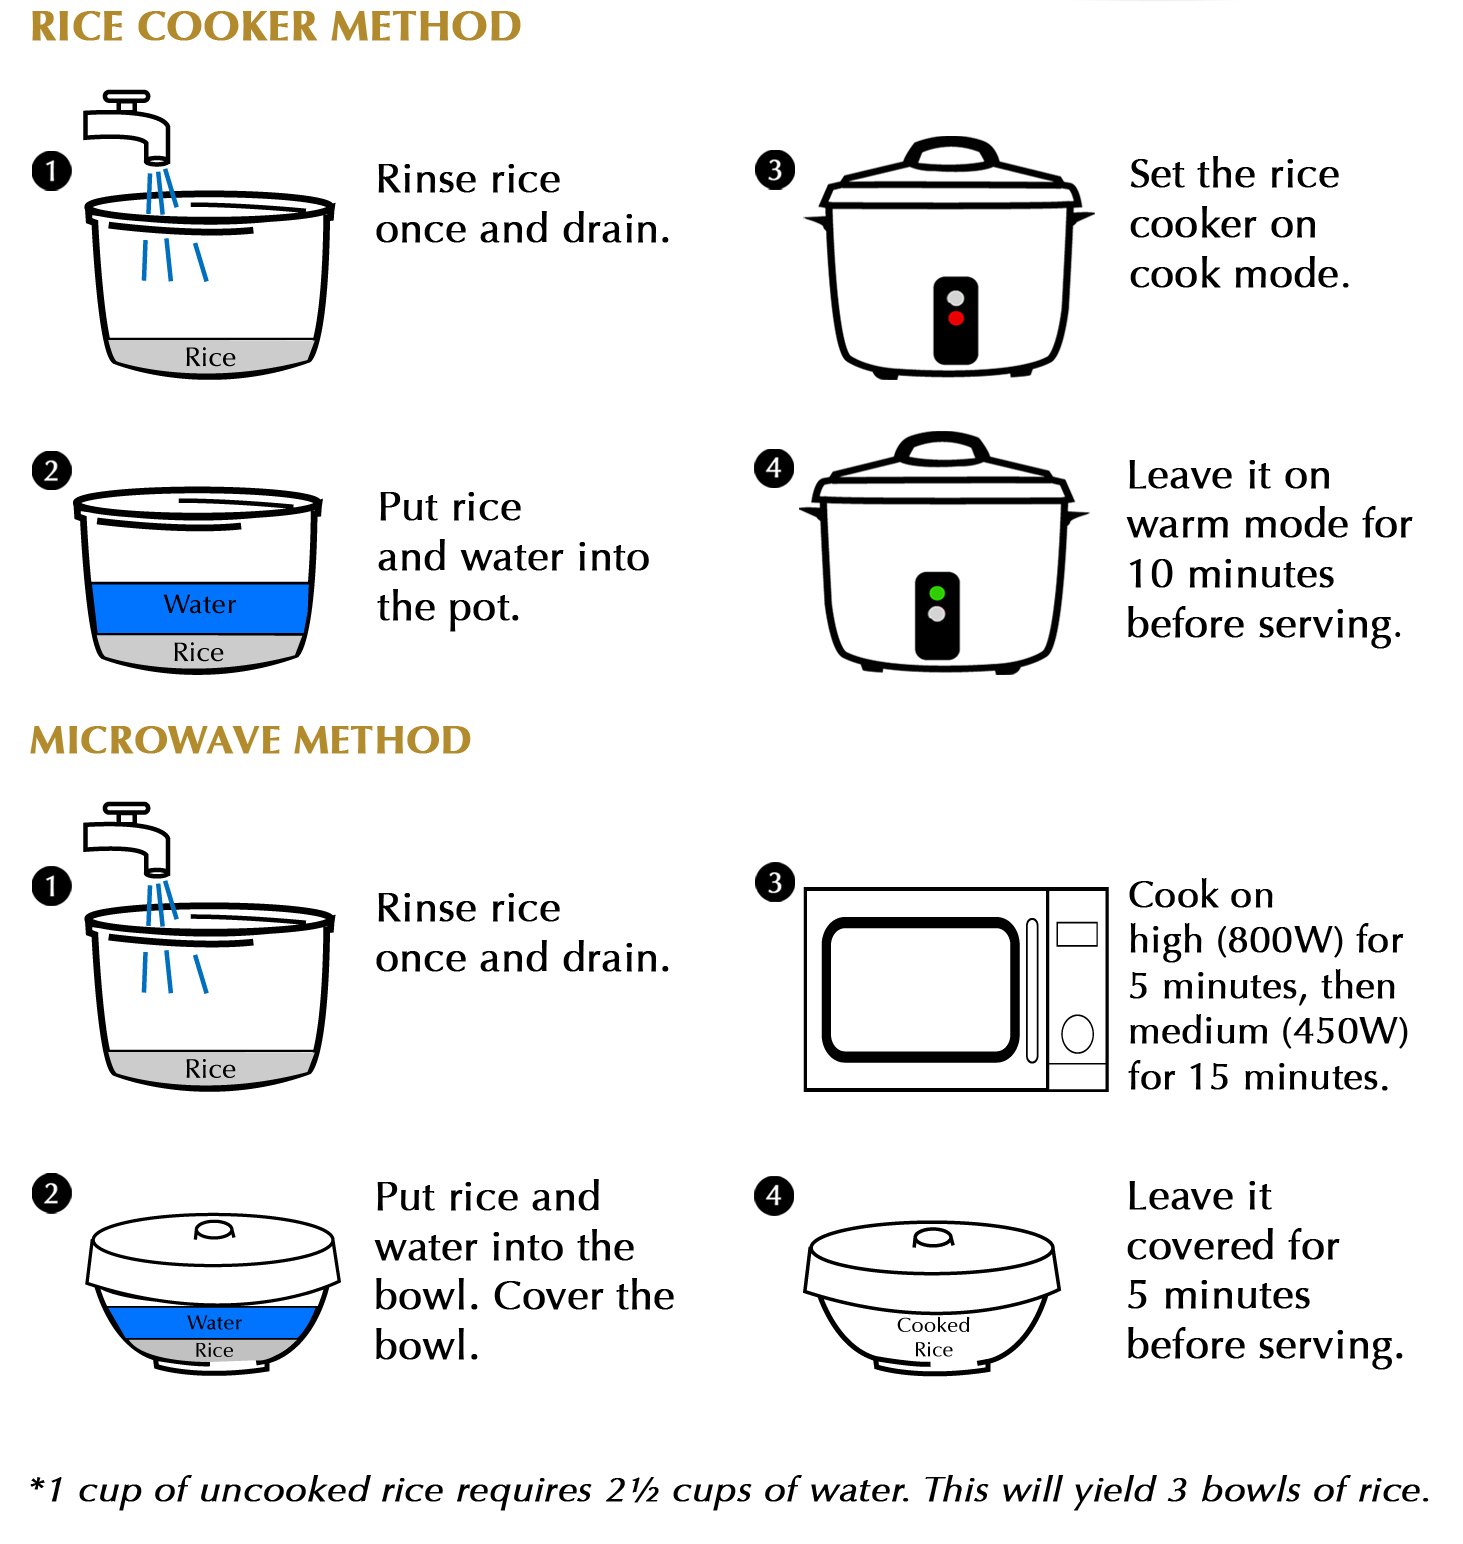 Belle rice cooker instructions